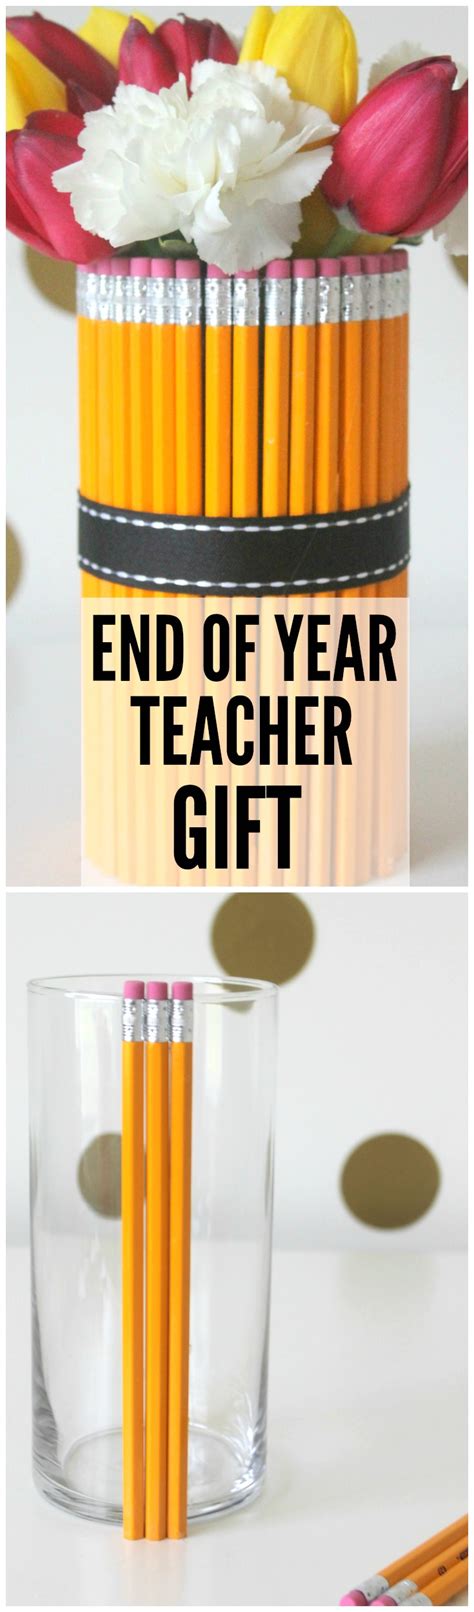 See more ideas about diy teacher gifts, teacher gifts, gifts. Pencil Vase DIY - End of School Teacher Gift | Catch My Party